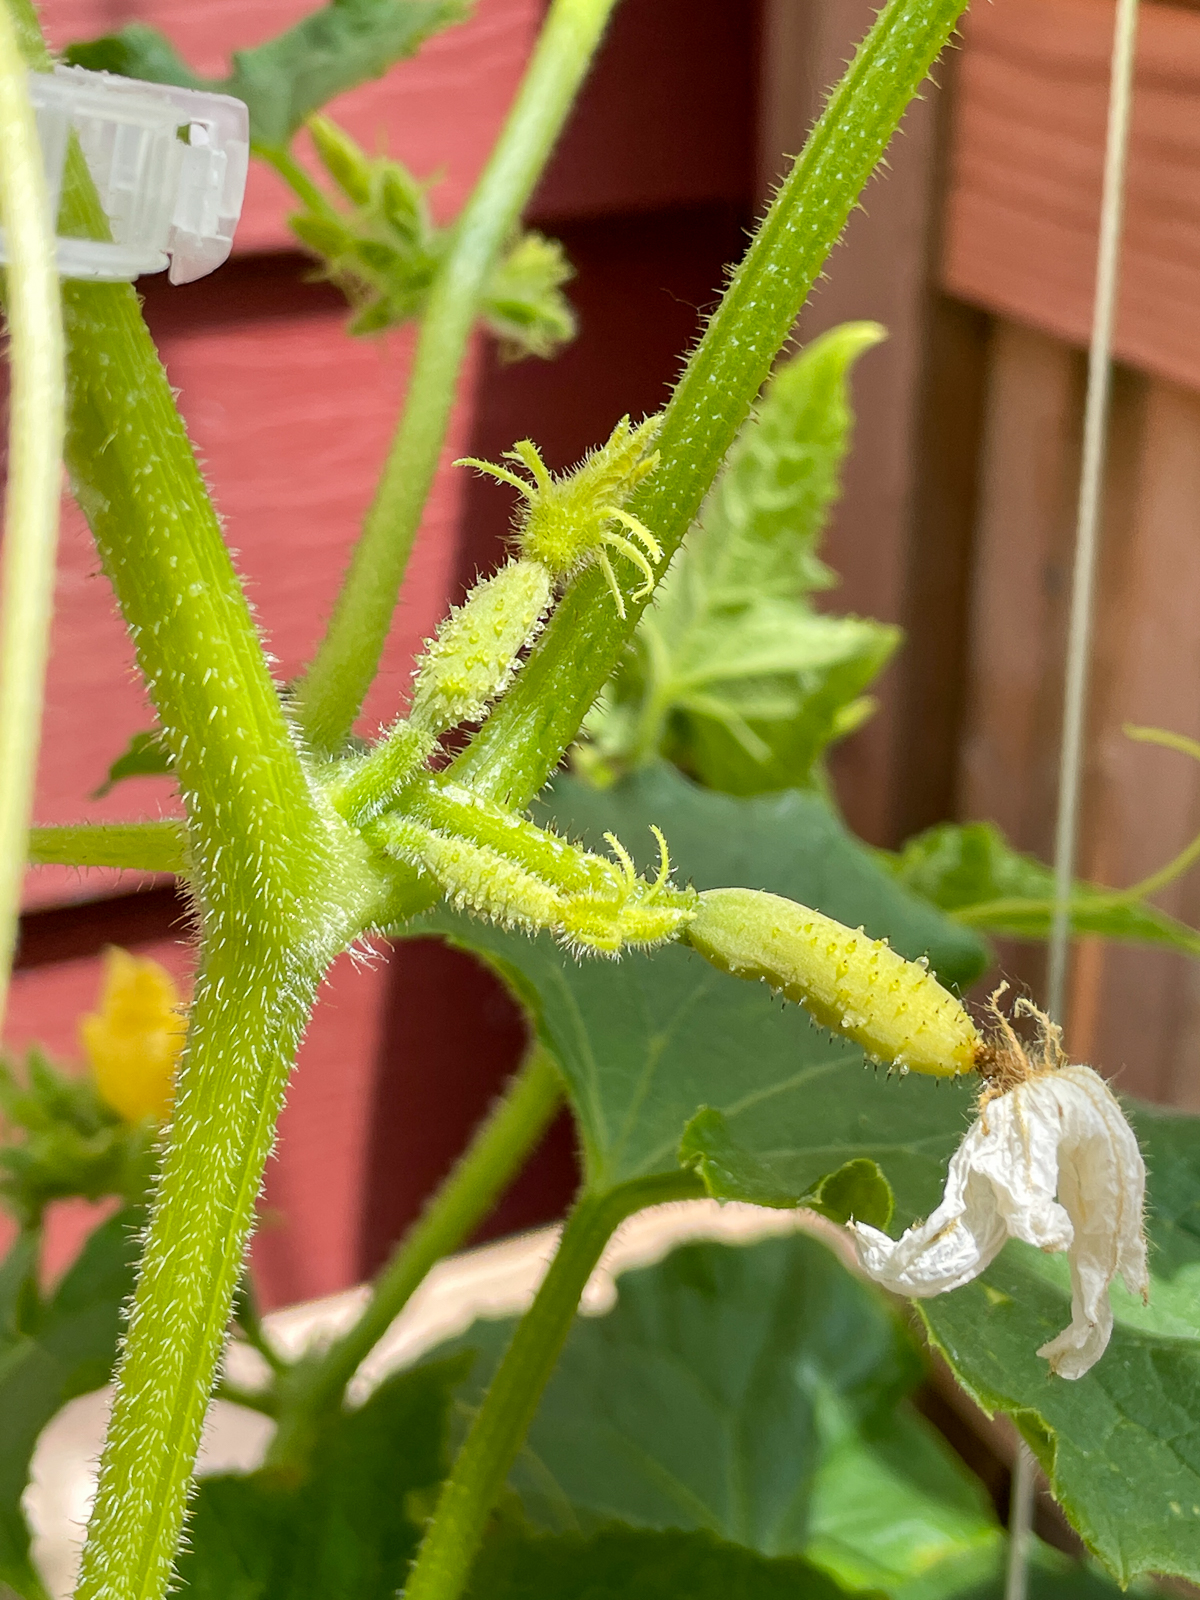 tiny cucumbers growing on plant